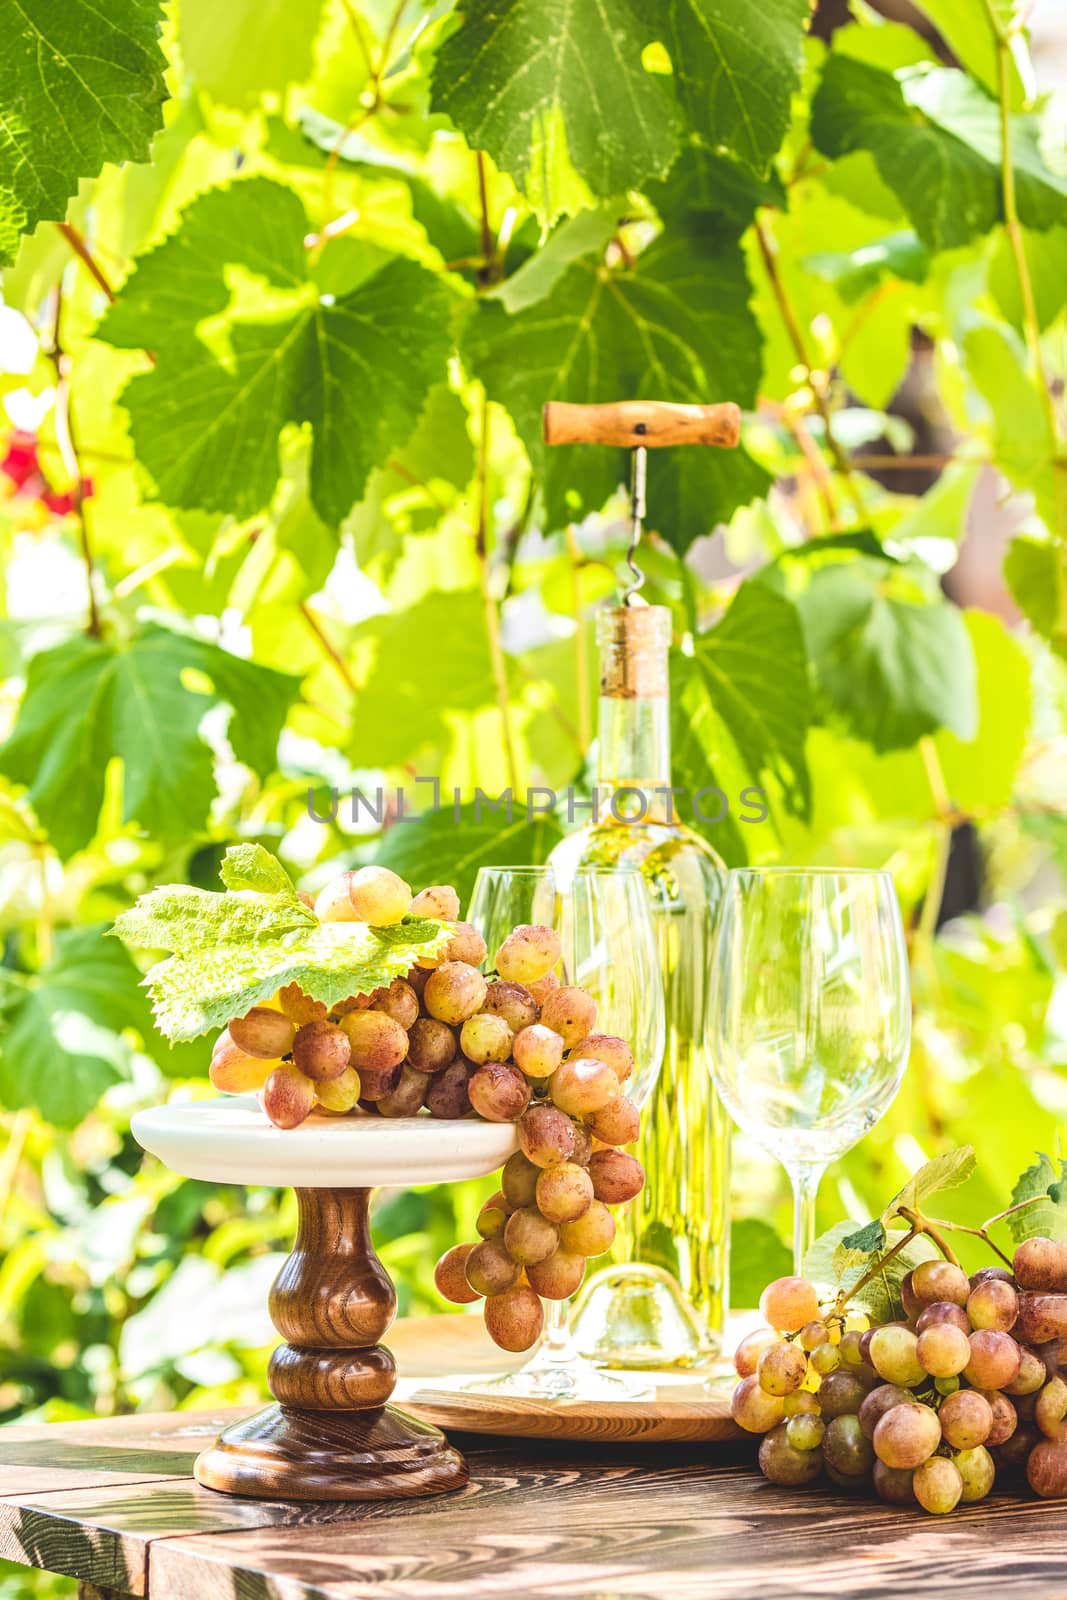 Bunch of grapes with water drops on the table. Sunny garden with by ArtSvitlyna